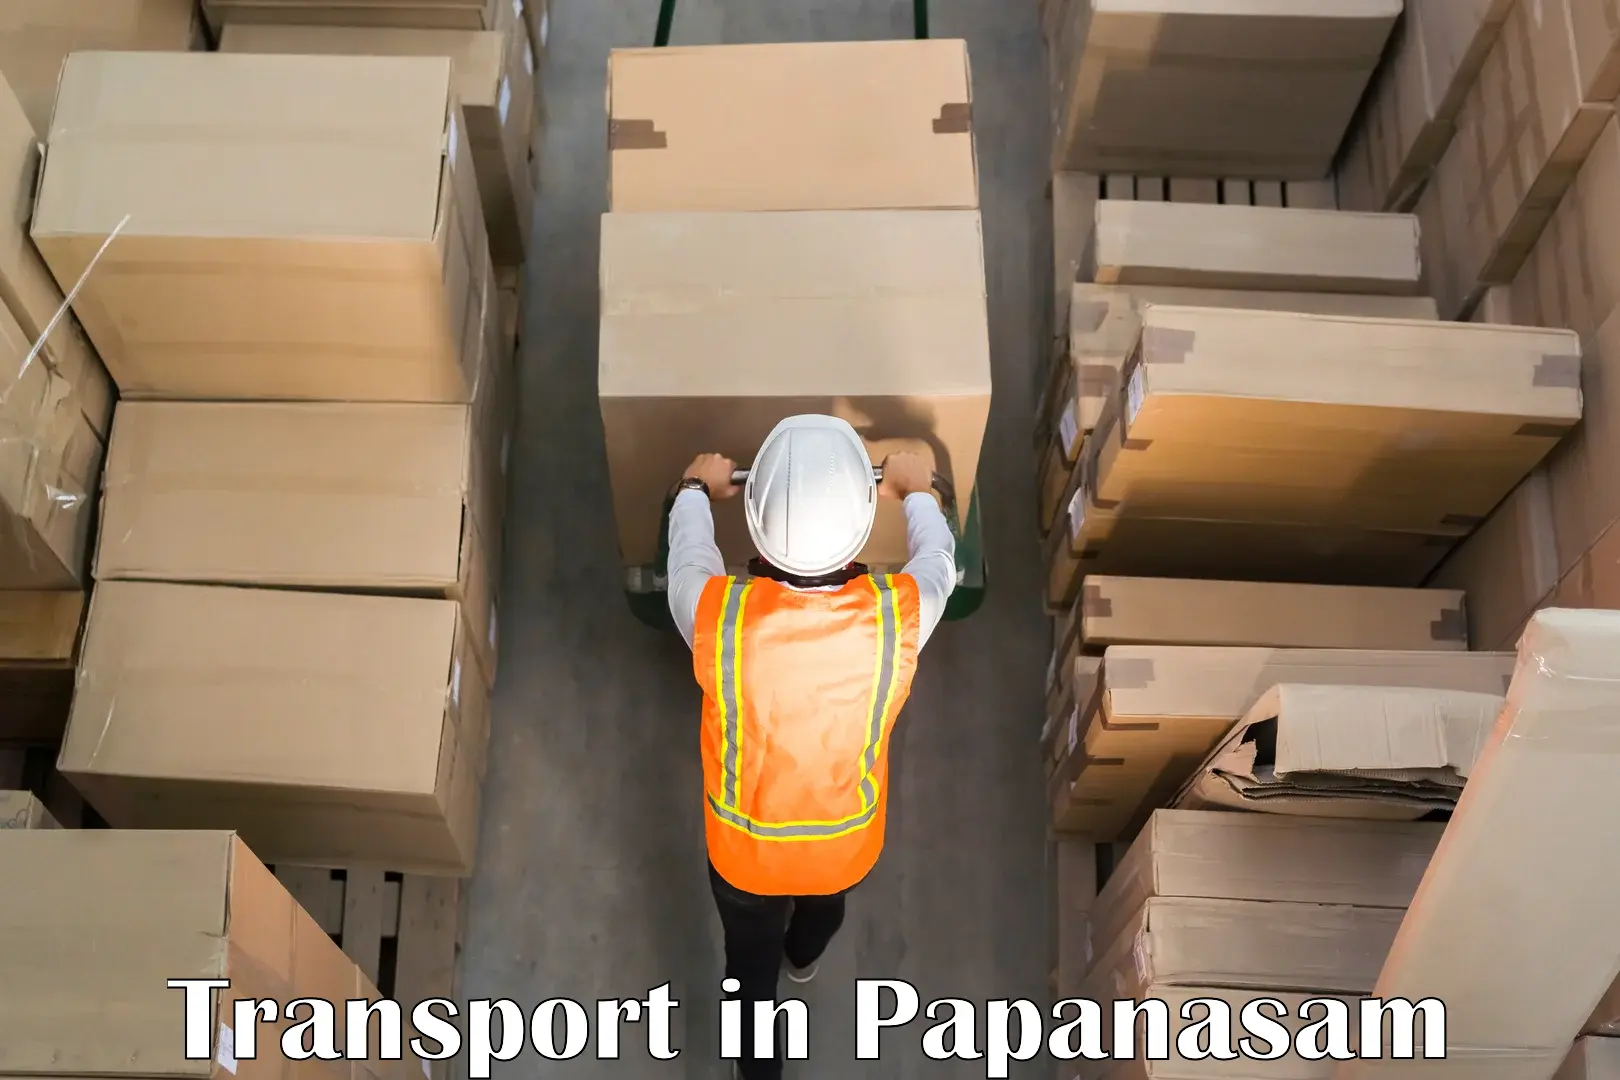 Express transport services in Papanasam